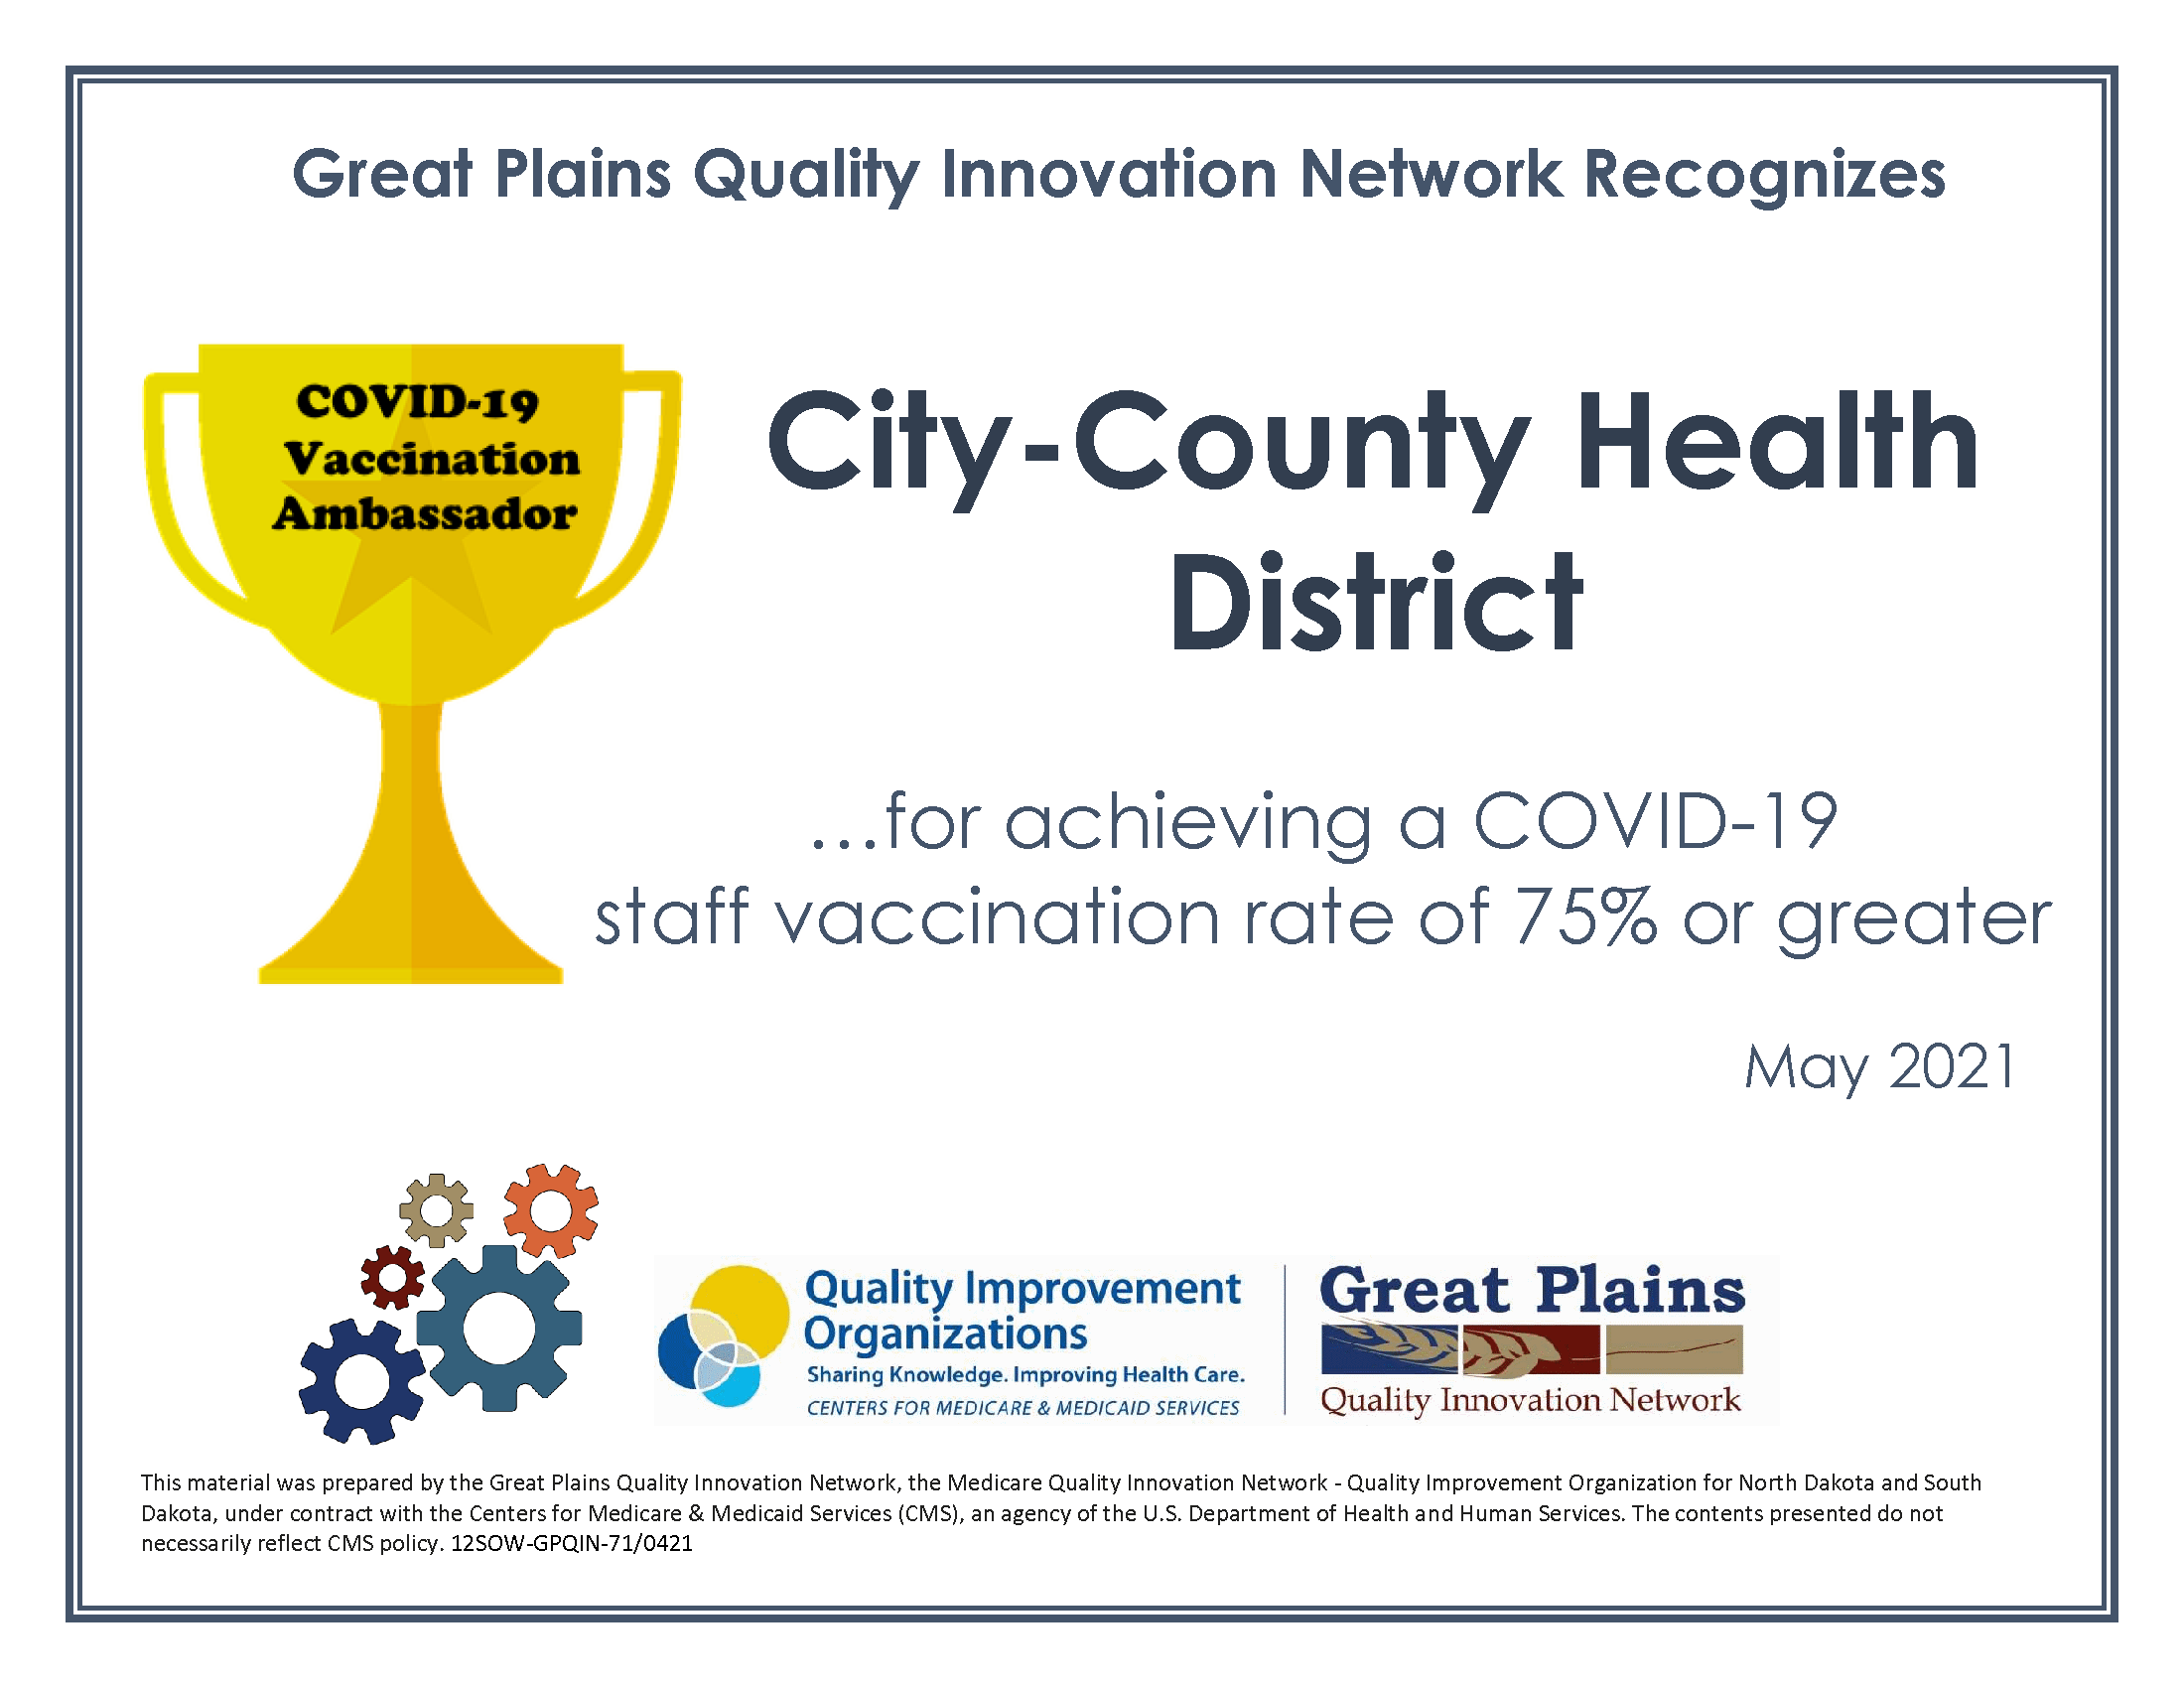 City-County Health District